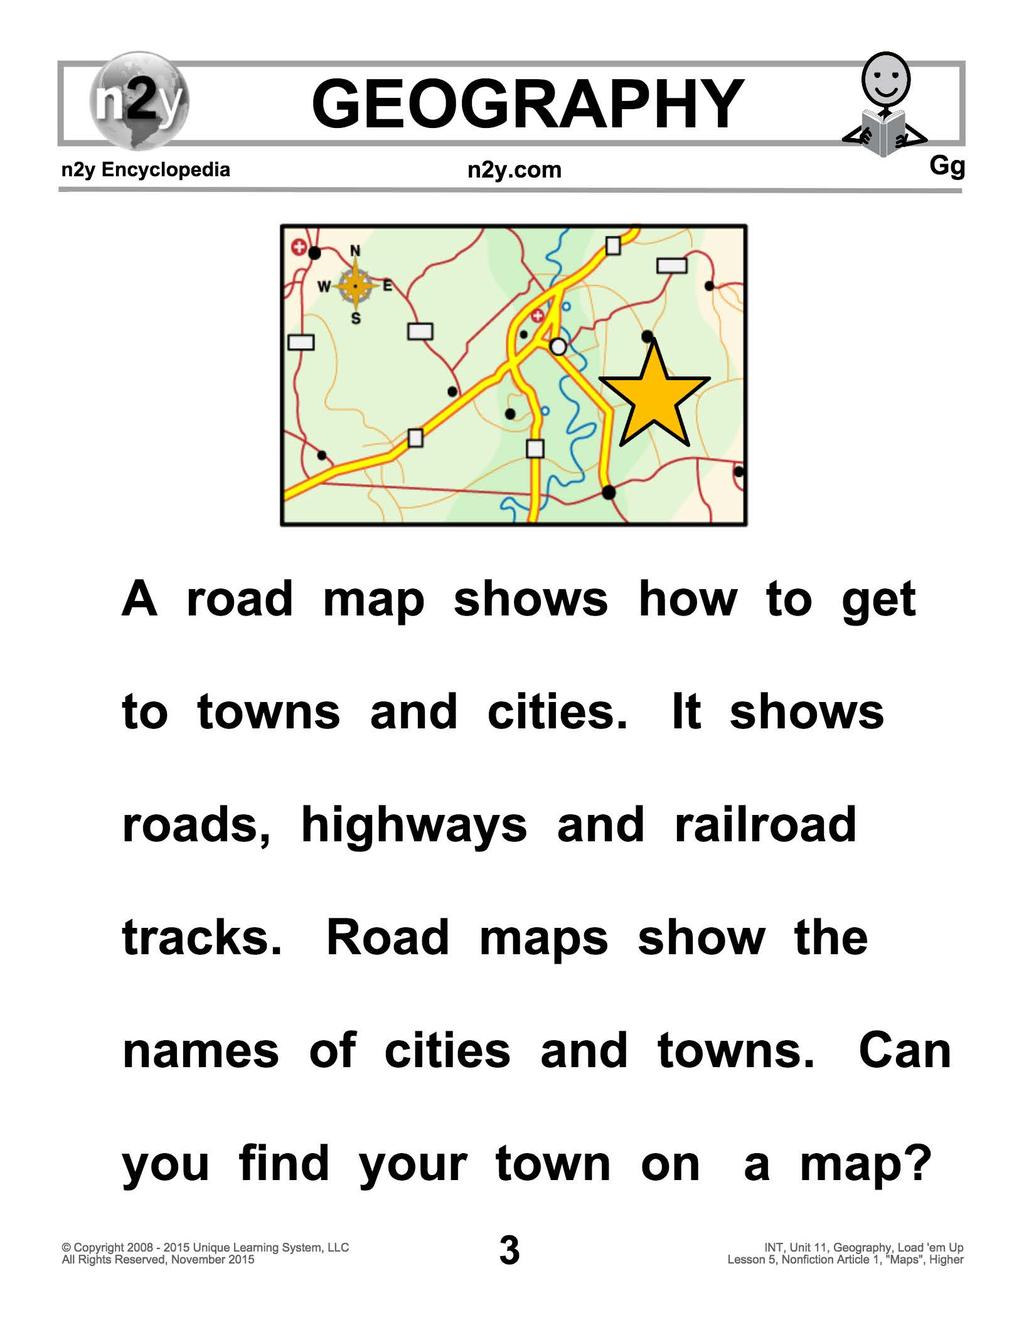 A road map shows how to get to towns and cities. It shows roads, highways and railroad tracks.